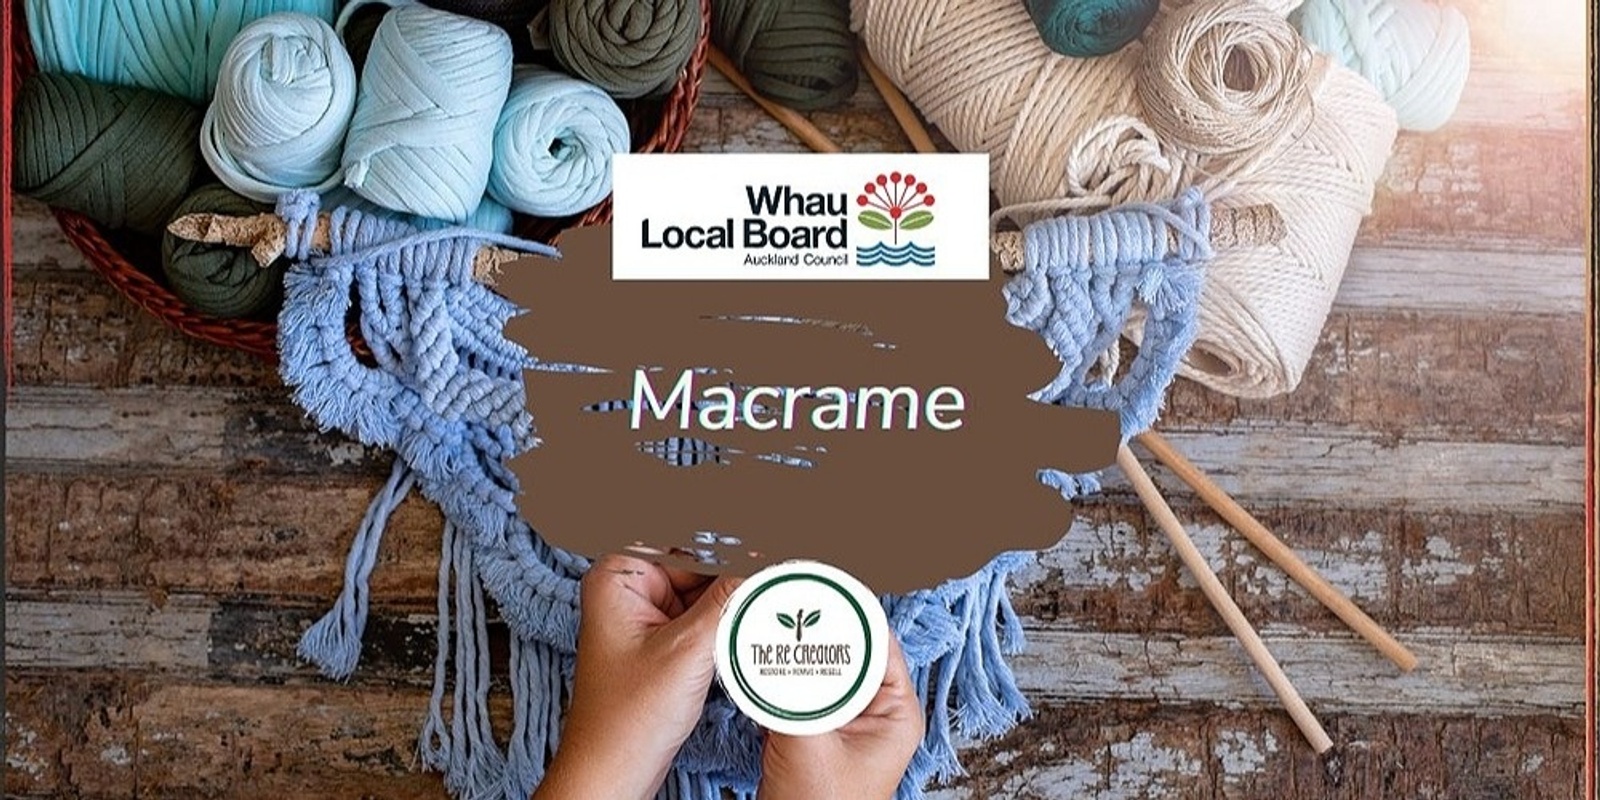 Macrame for Adults, Blockhouse Bay Library, Sunday 2 April 1pm - 3 pm